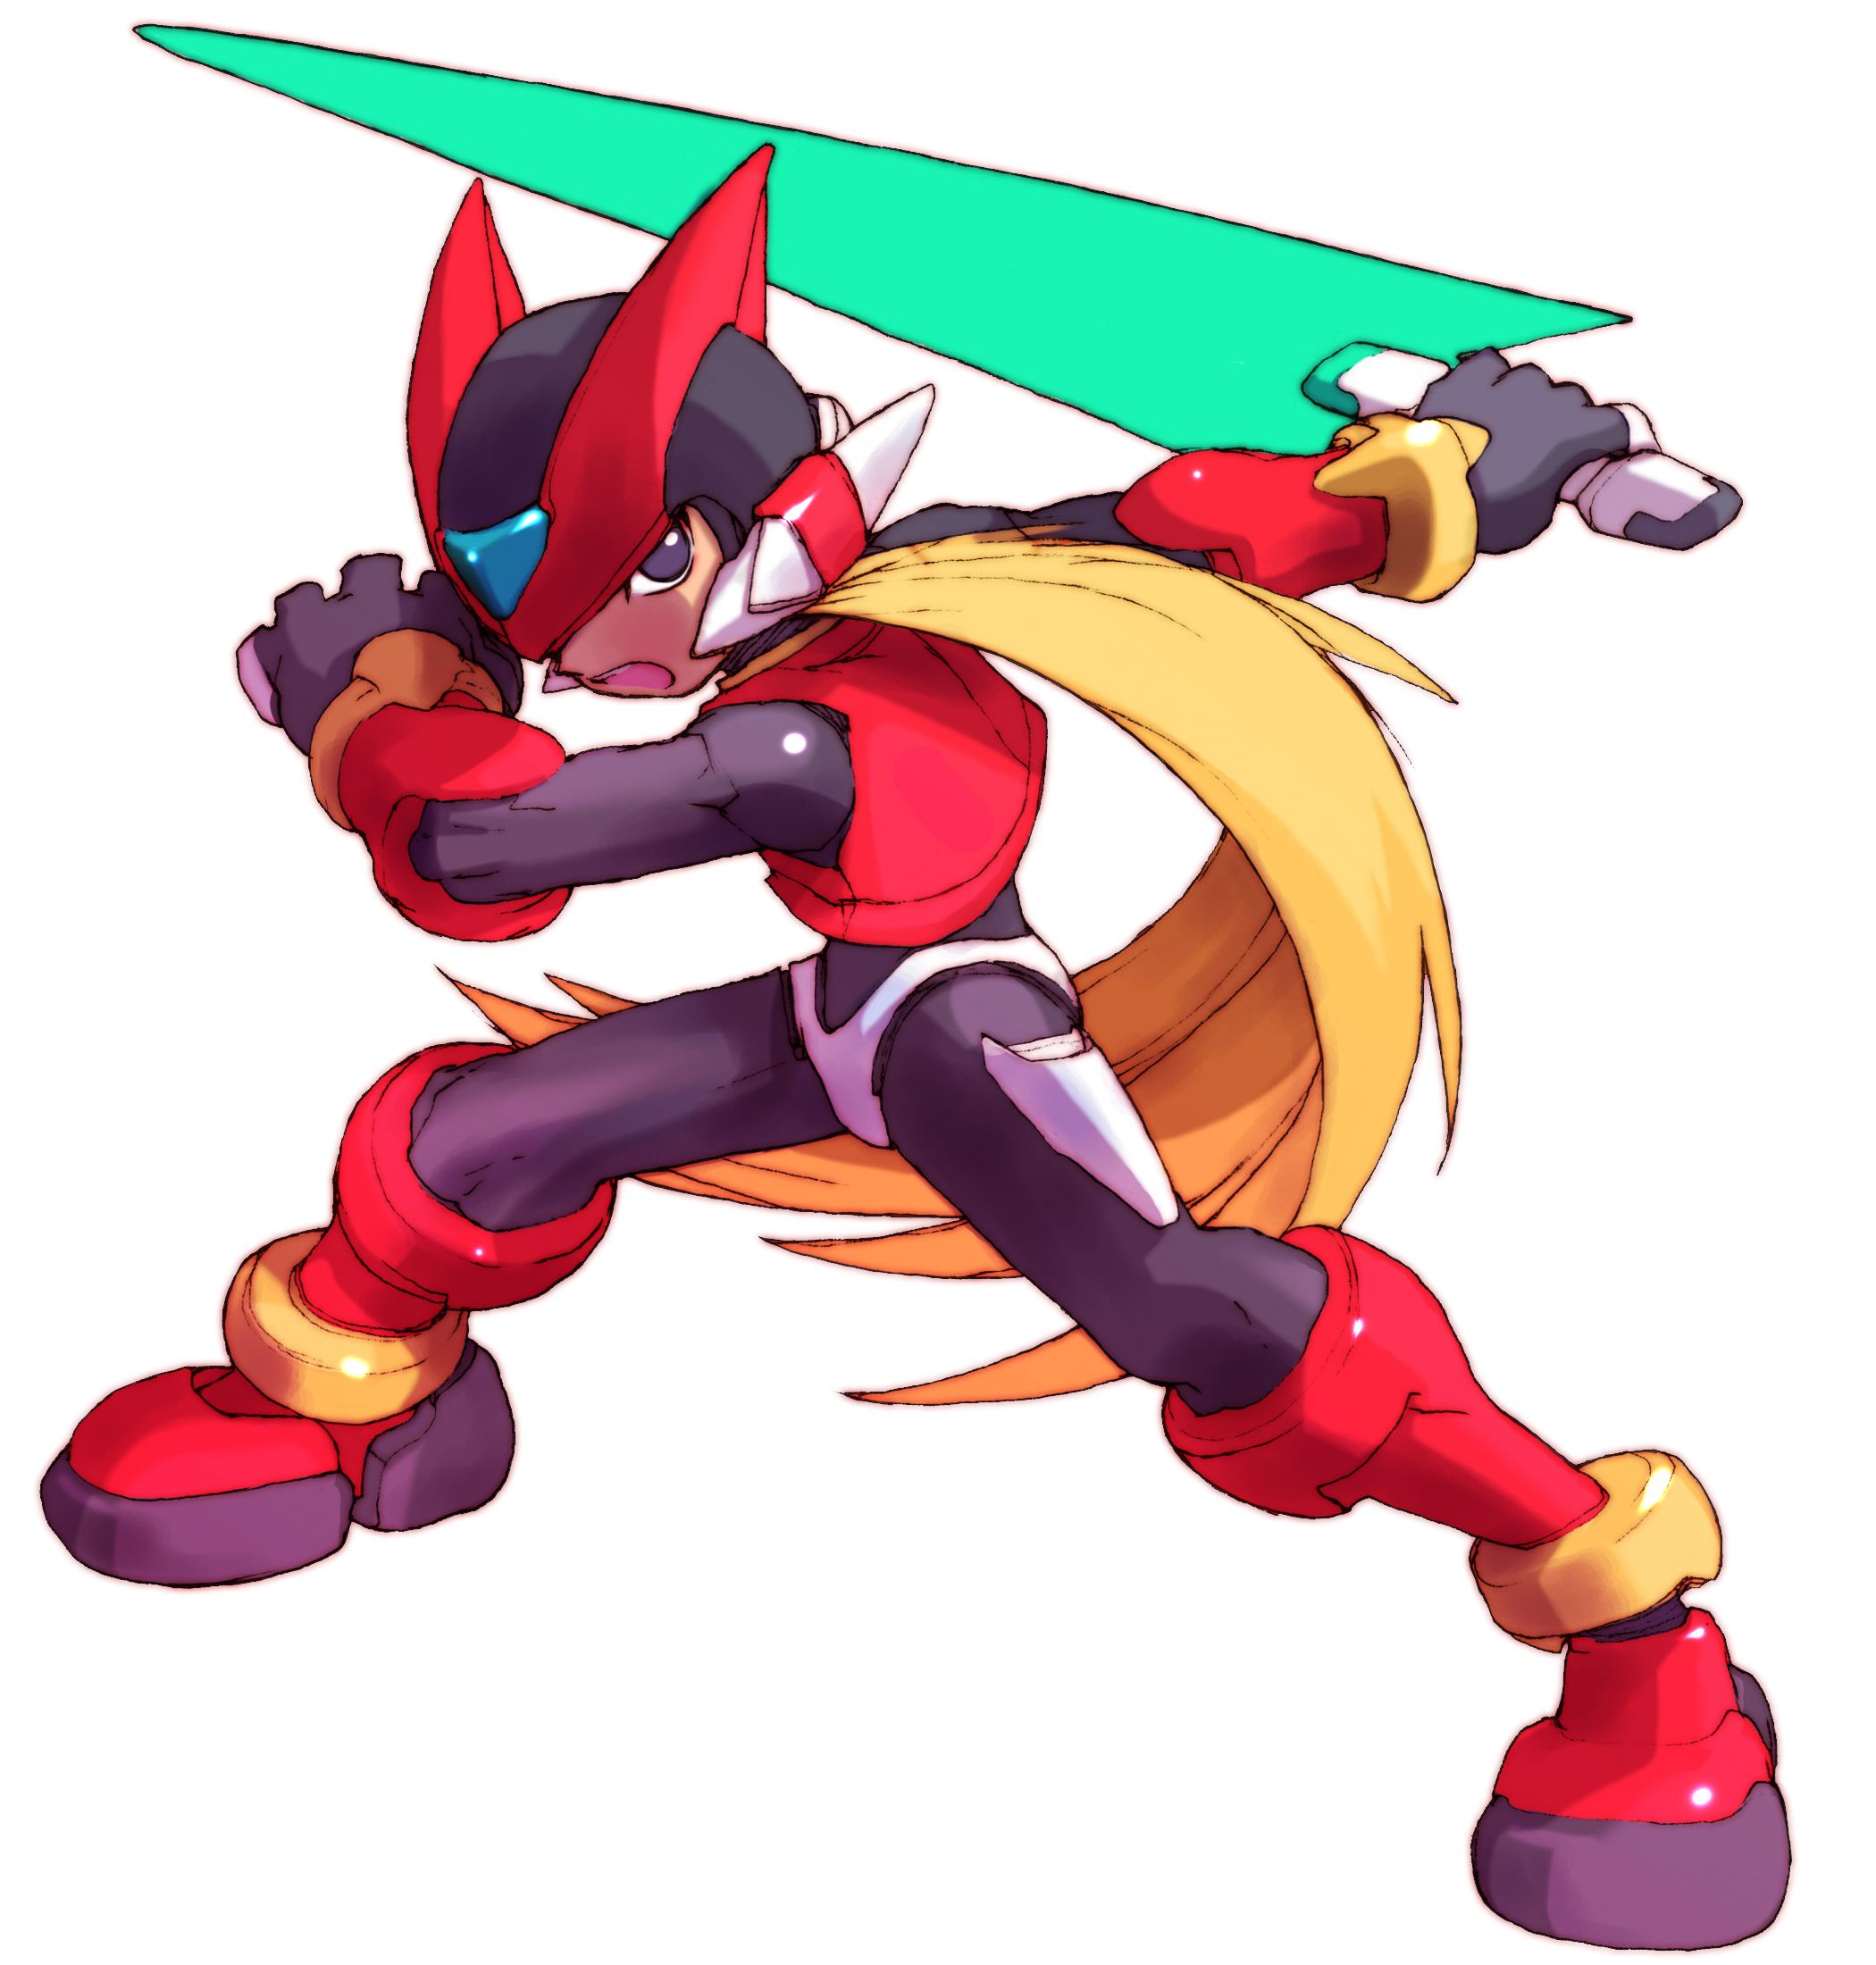 Mega Man Zero Collection assets released « Icrontic